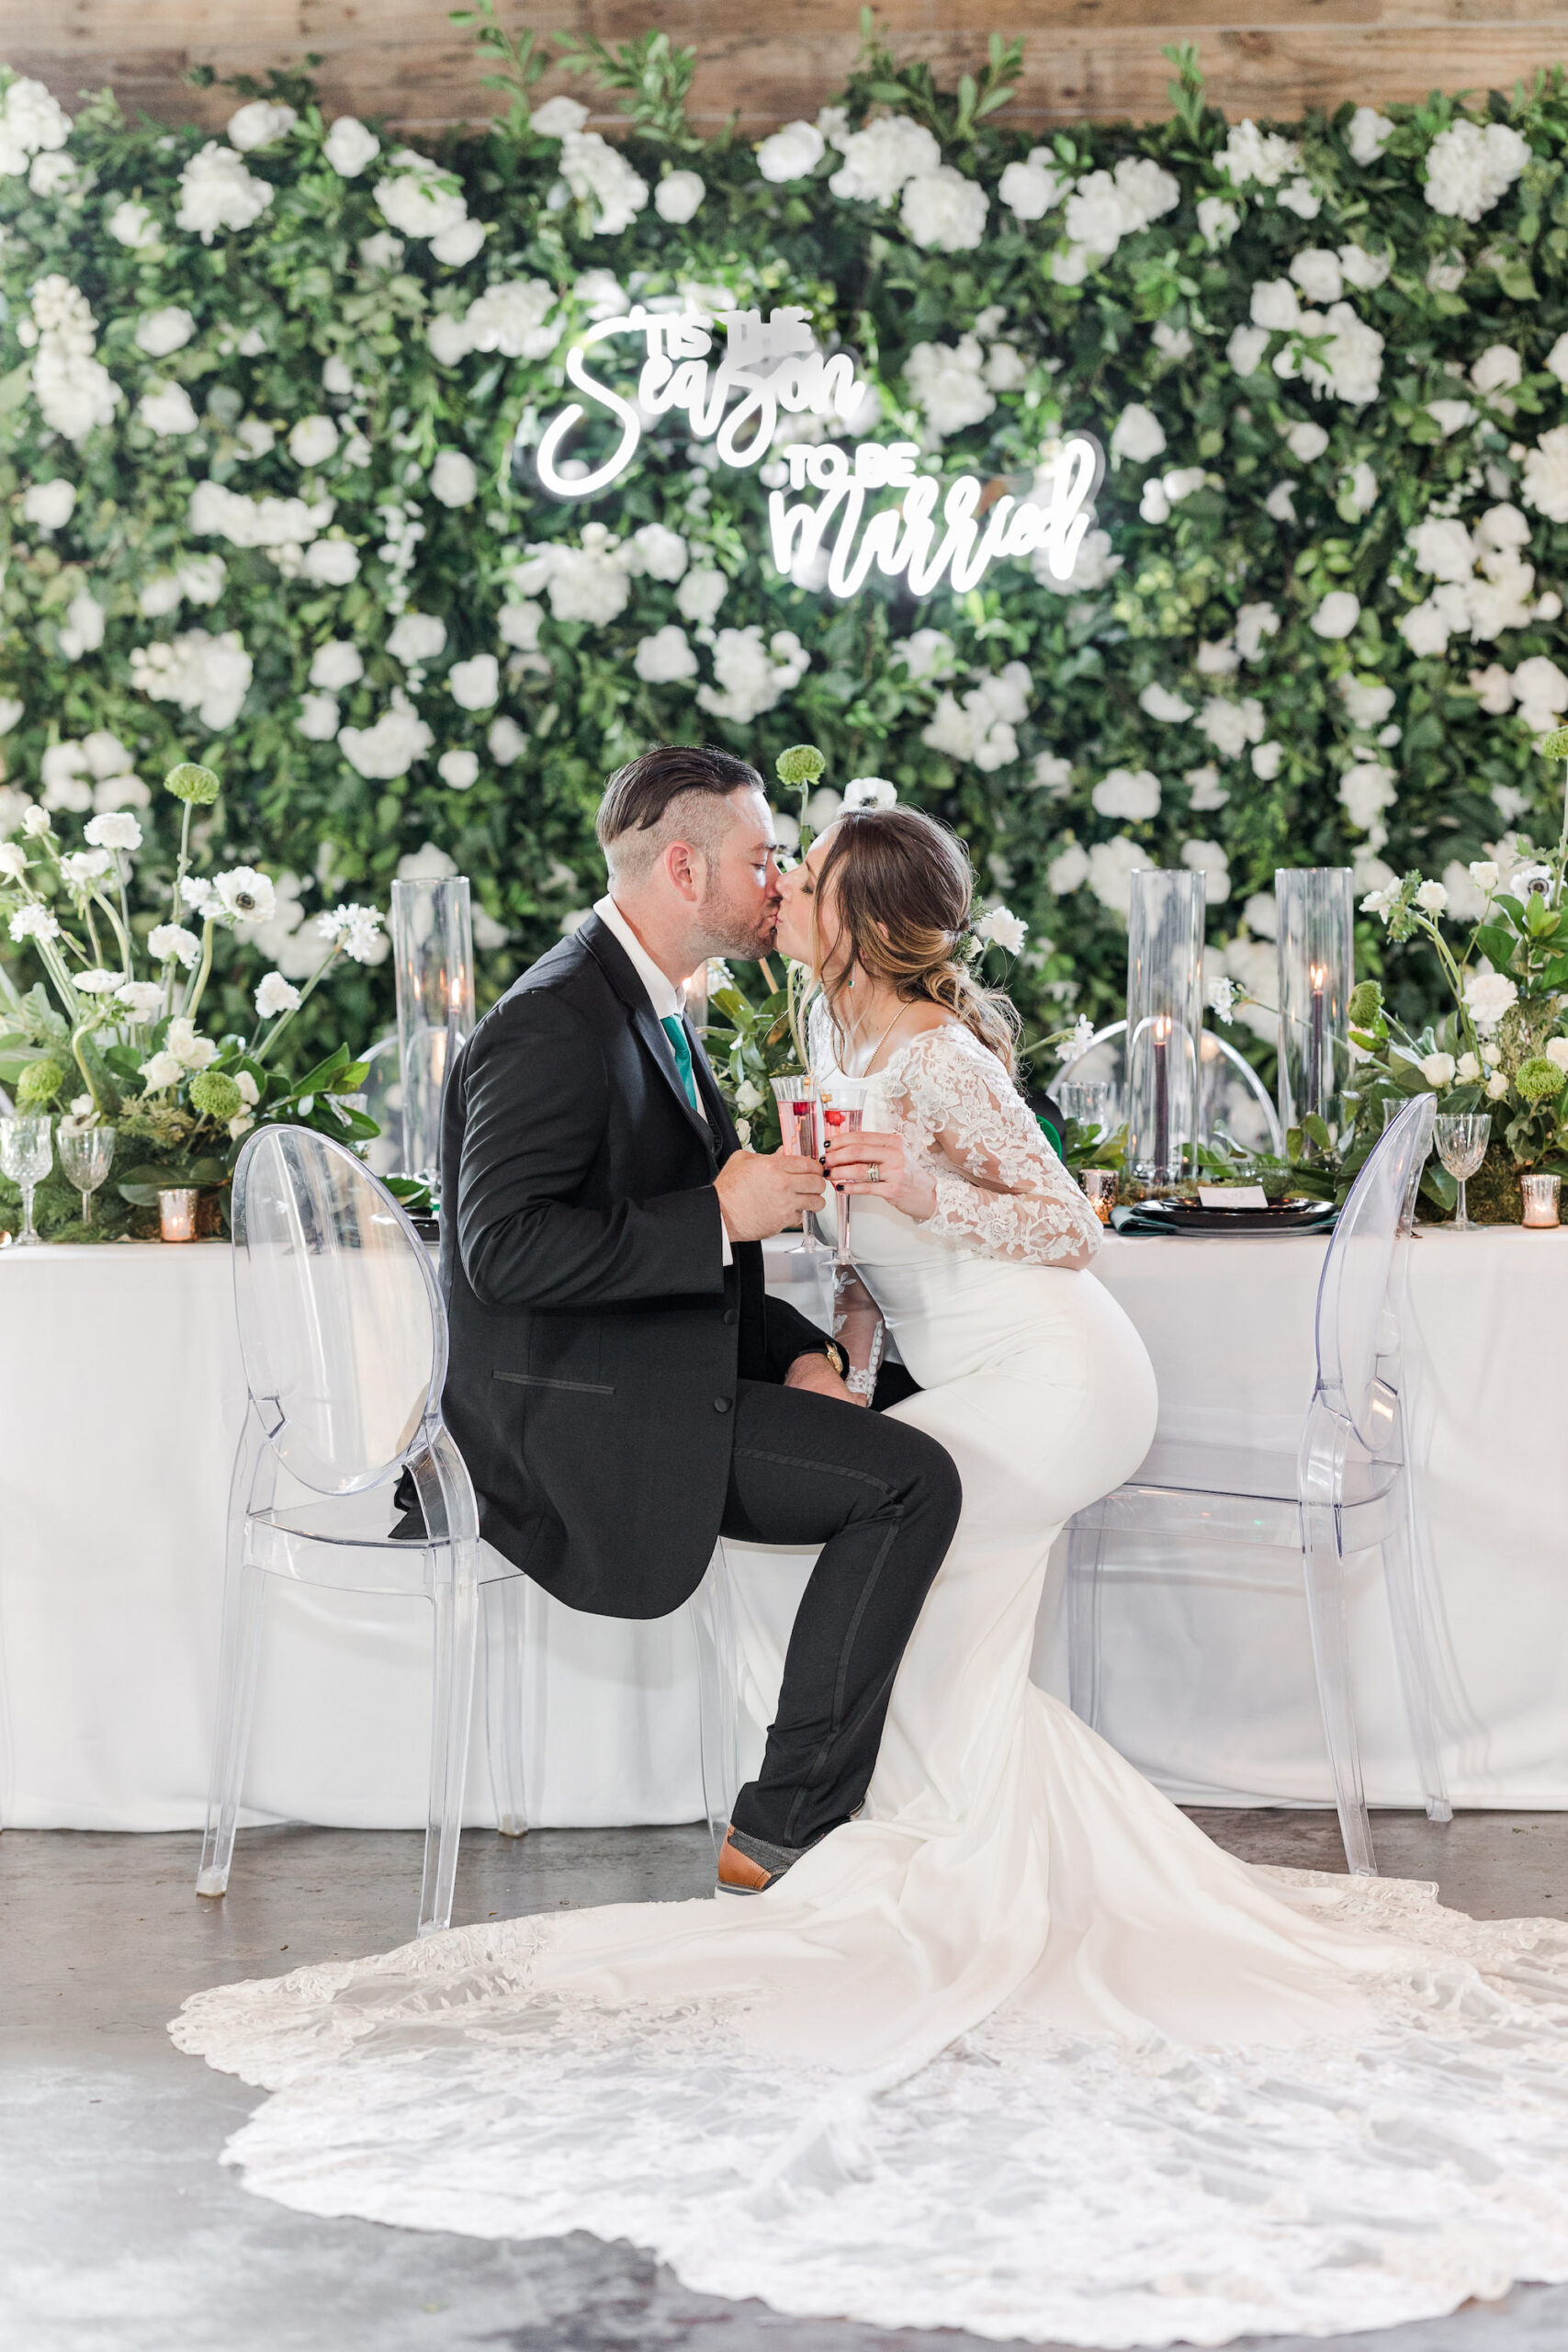 Winter Modern Whimsical Wedding Reception Styled Shoot Decor, Bride Wearing Sleek Lace and Illusion Long Sleeve Wedding Dress Kissing Groom Sitting in Ghost Acrylic Chairs, Long Feasting Table with White Table Linen, Lush Greenery and White Floral Wall Backdrop, White Neon Sign, Glass Cylinders with Black Candlesticks | Tampa Bay Wedding Planner MDP Events Planning | Wedding Furniture and Linens Gabro Event Services | Wedding Dress Truly Forever Bridal Tampa